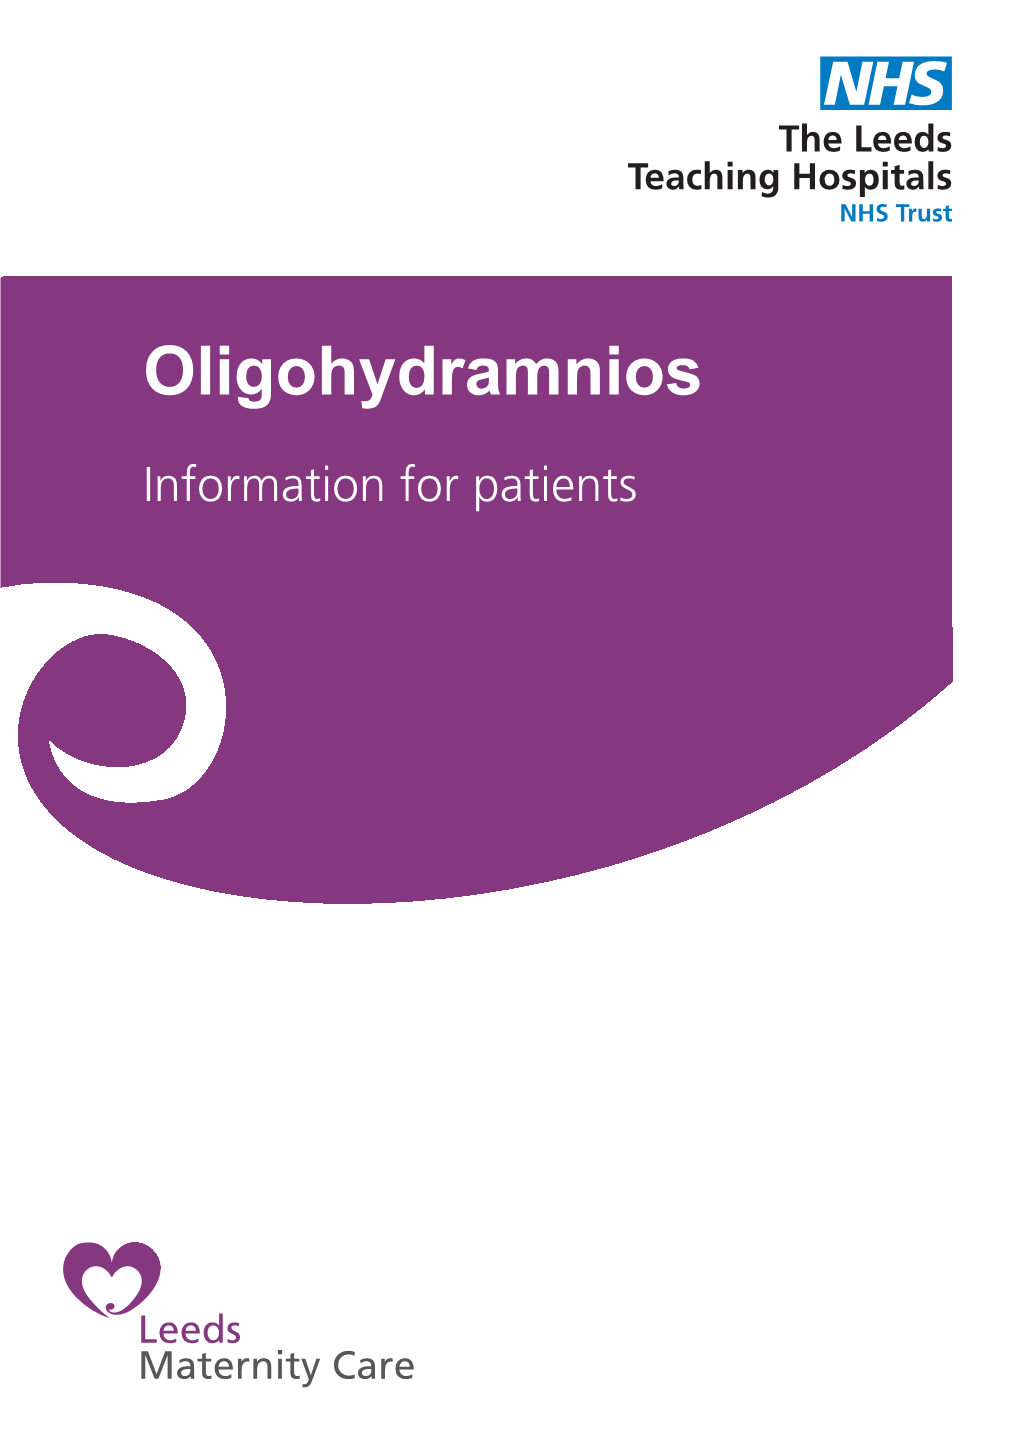 Oligohydramnios Information for Patients